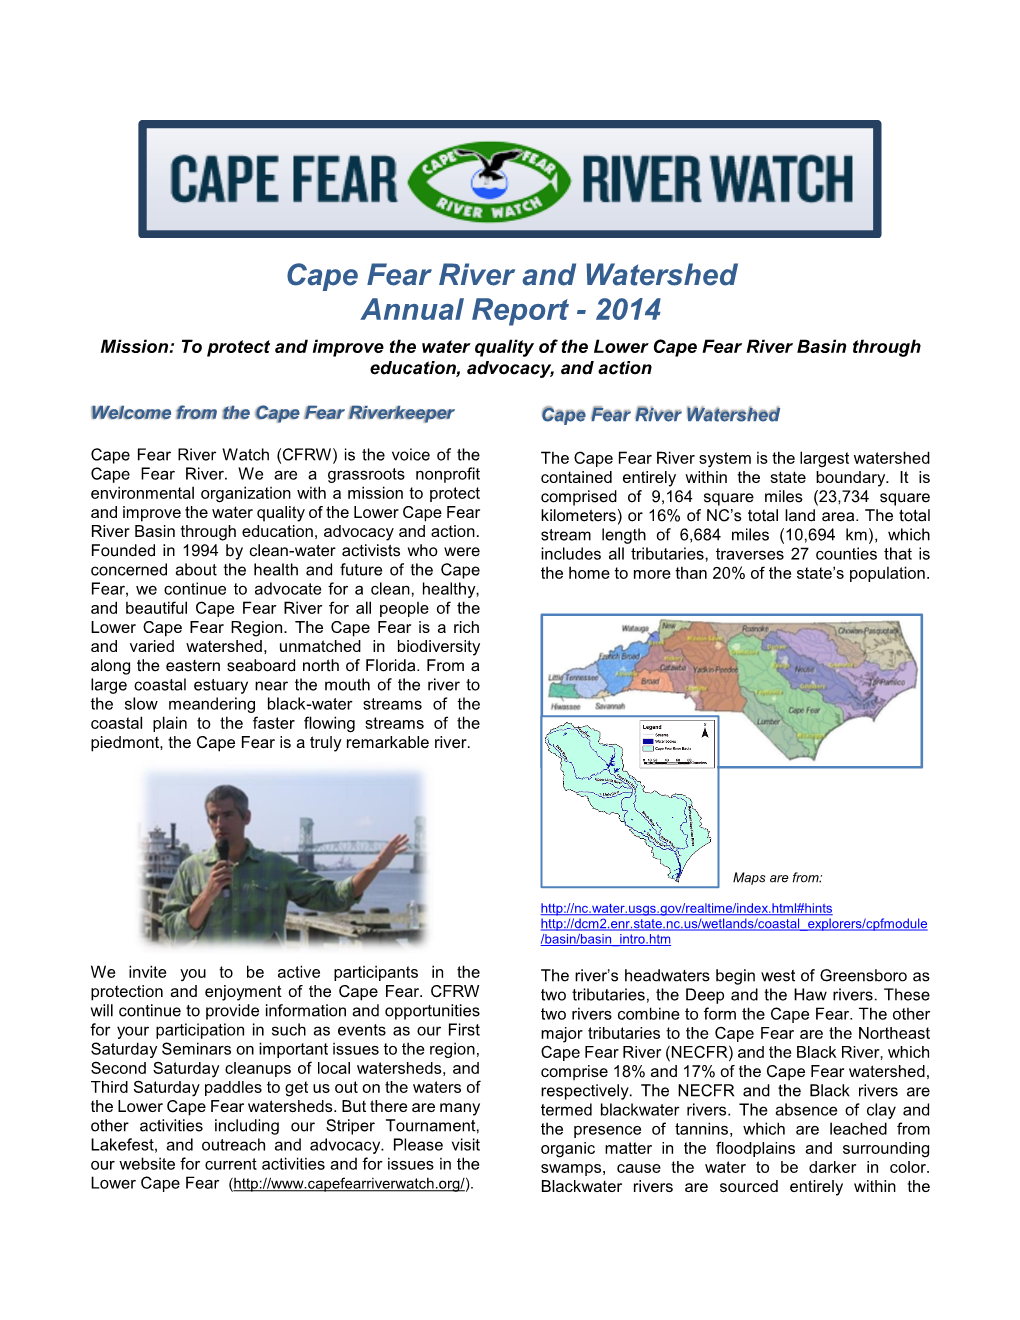 Cape Fear River and Watershed Annual Report - 2014